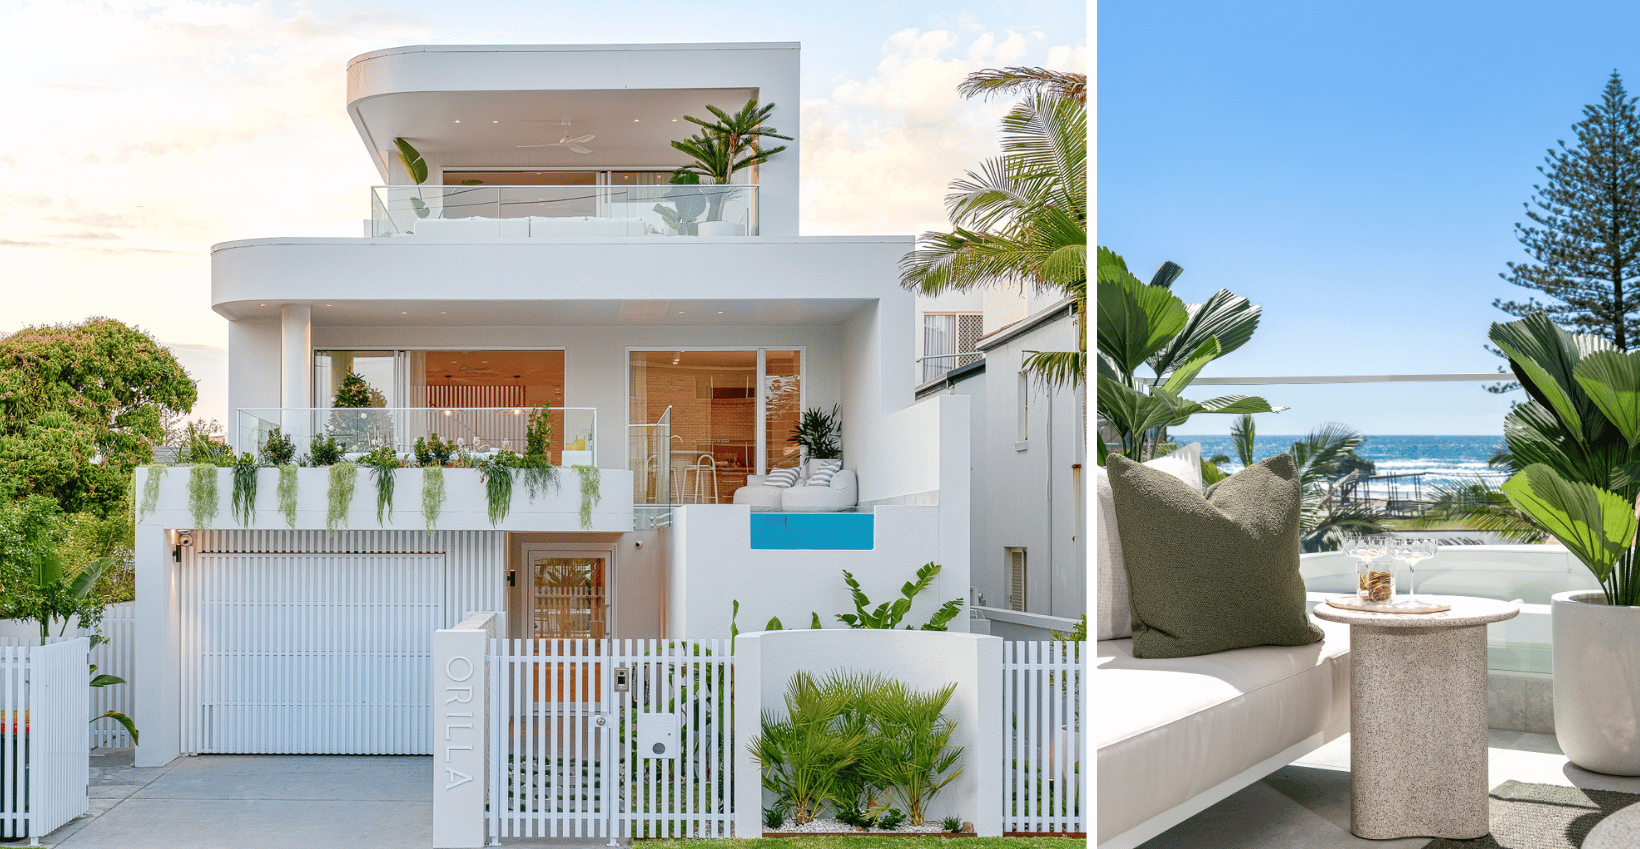 The front of our Miami Prize Home at dawn, next to the view of the ocean from the top balcony of the home